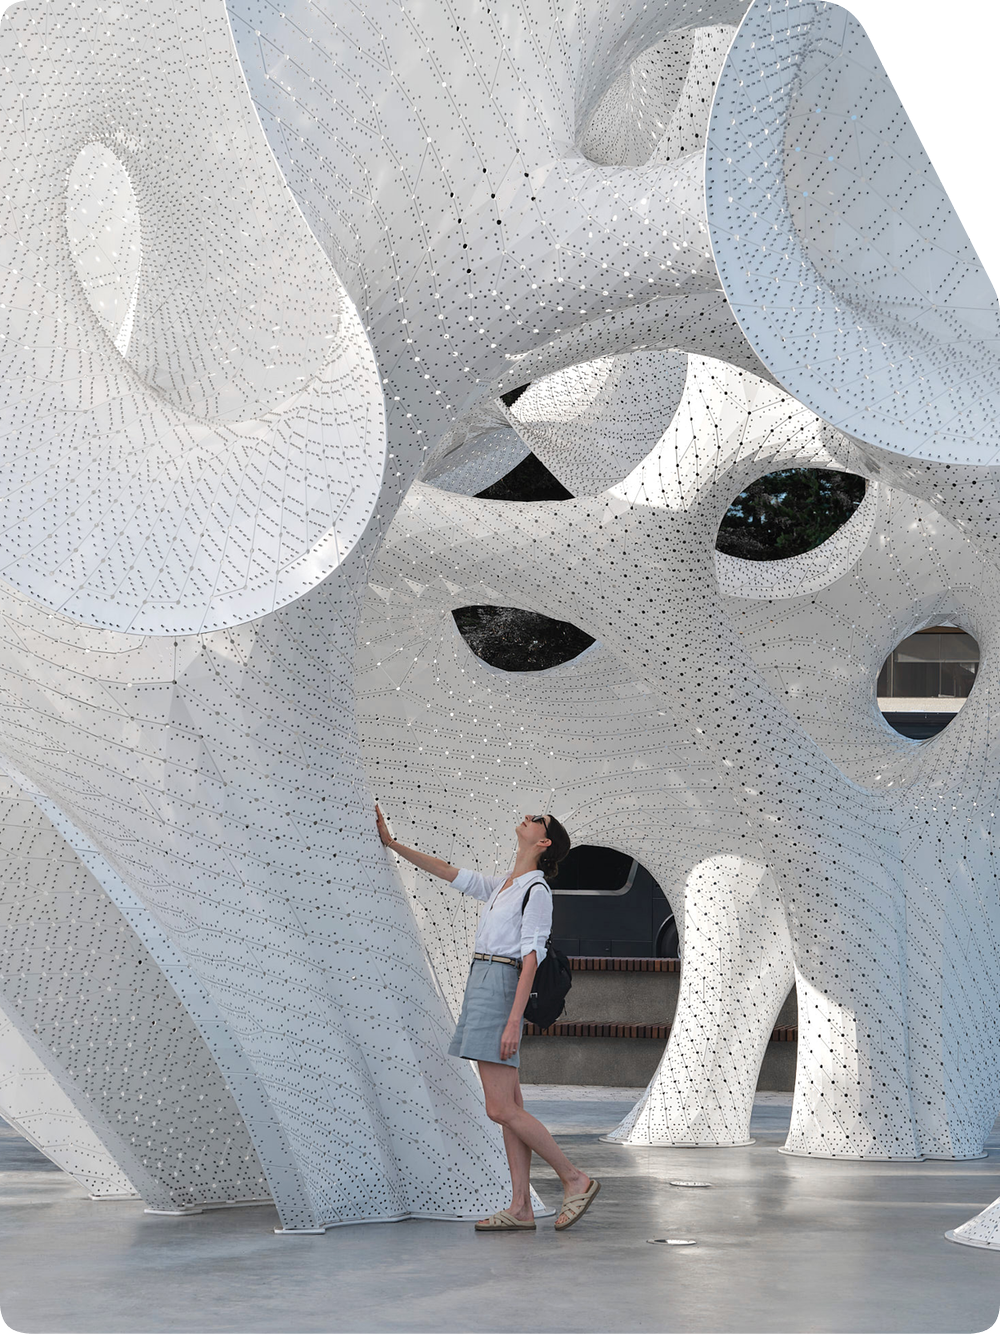 Boolean Operator ​lands in Suzhou by Marc Fornes / THEVERYMANY